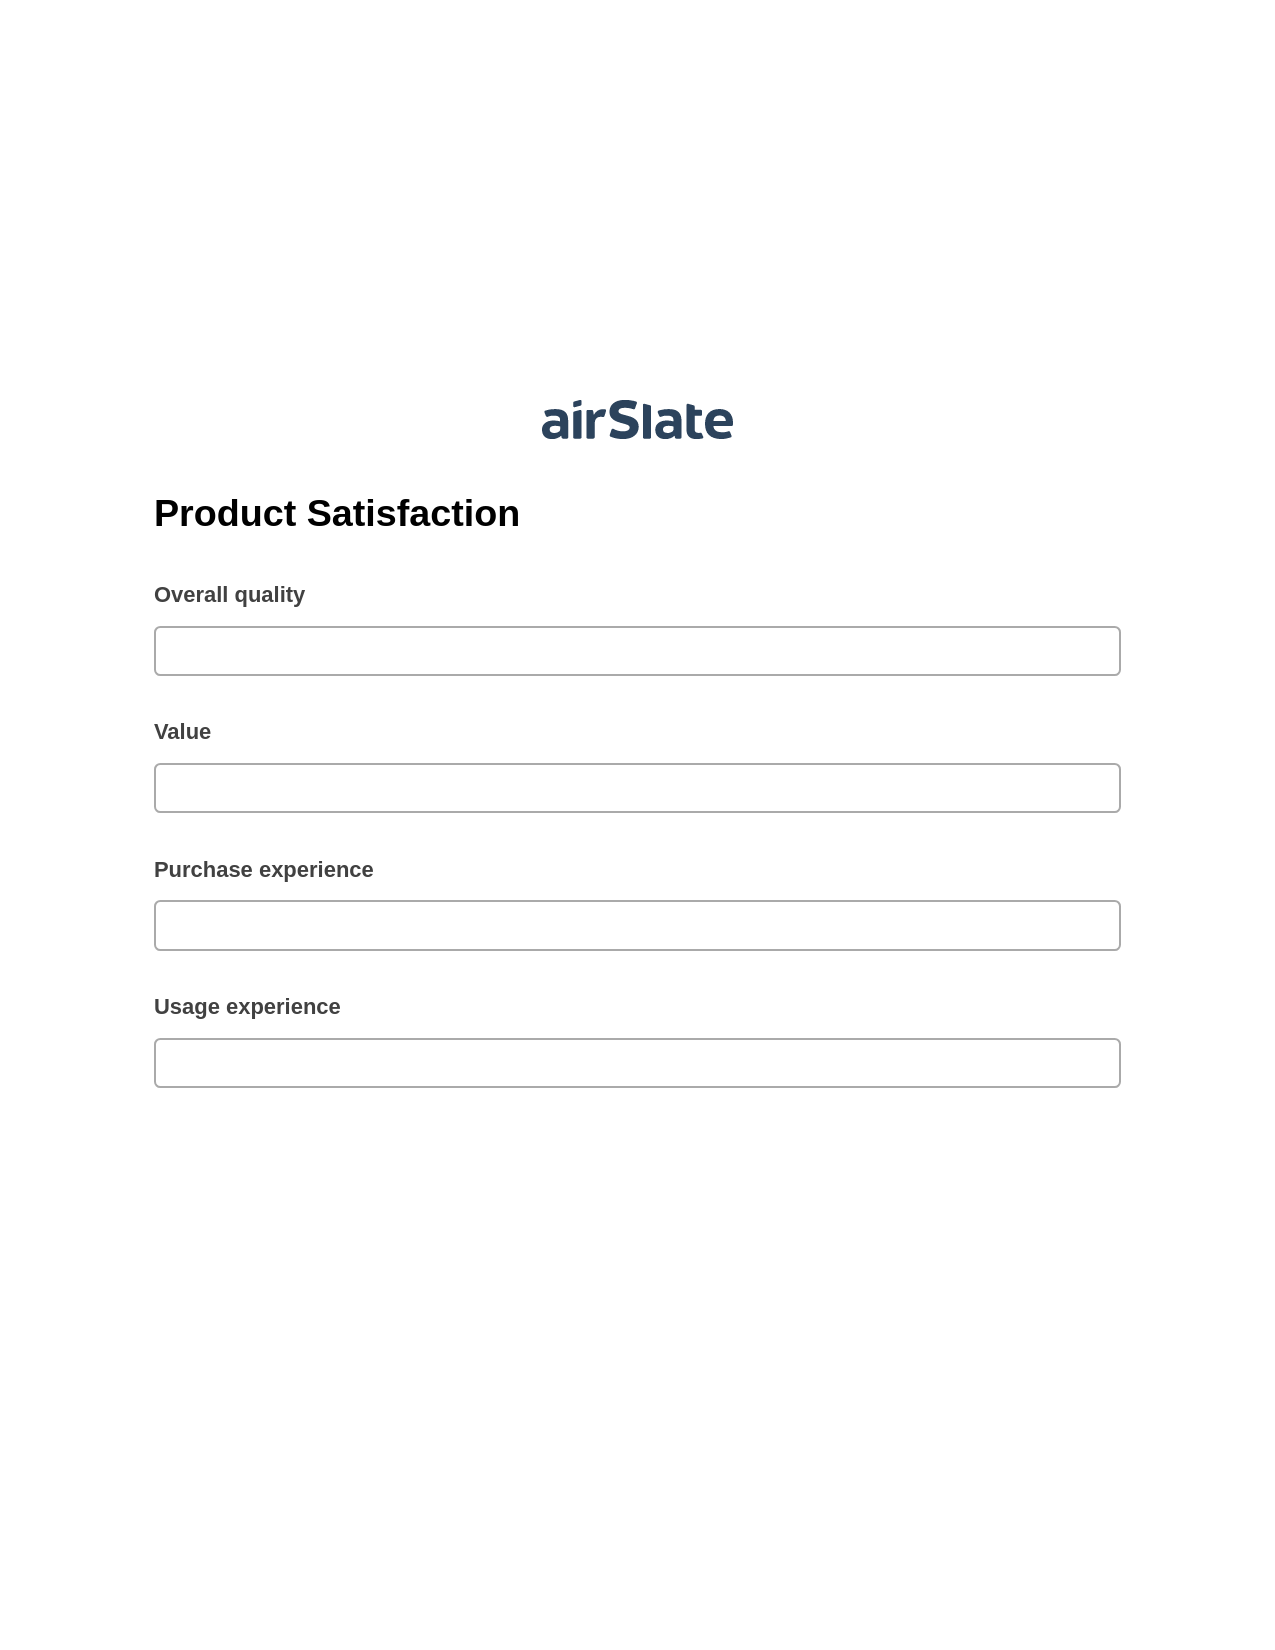 Multirole Product Satisfaction Pre-fill Slate from MS Dynamics 365 Records Bot, Update MS Dynamics 365 Records Bot, Email Notification Postfinish Bot